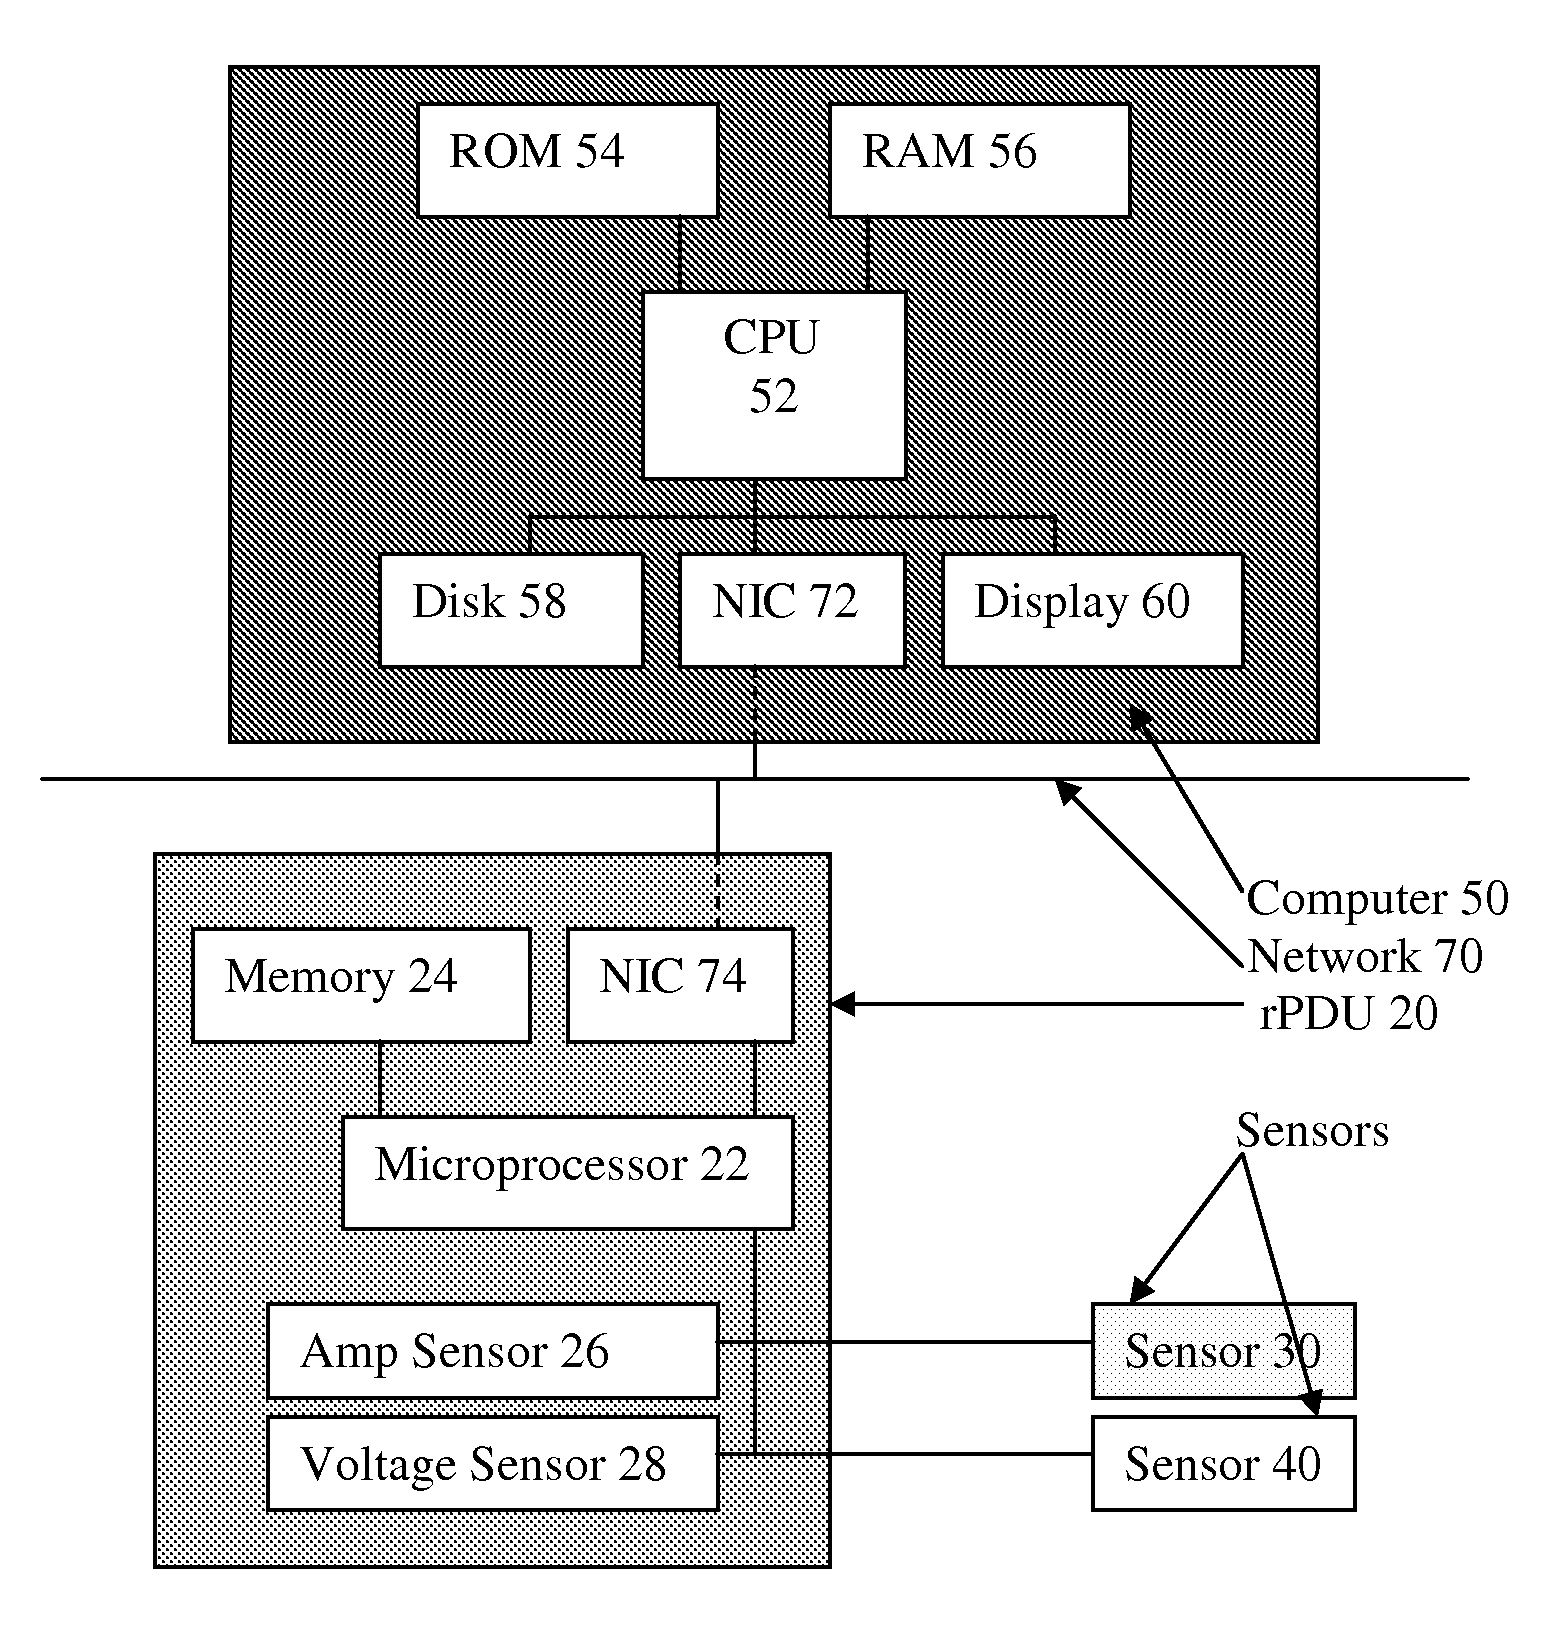 System and method of safe and effective engergy usage and conservation for data centers with rack power distribution units